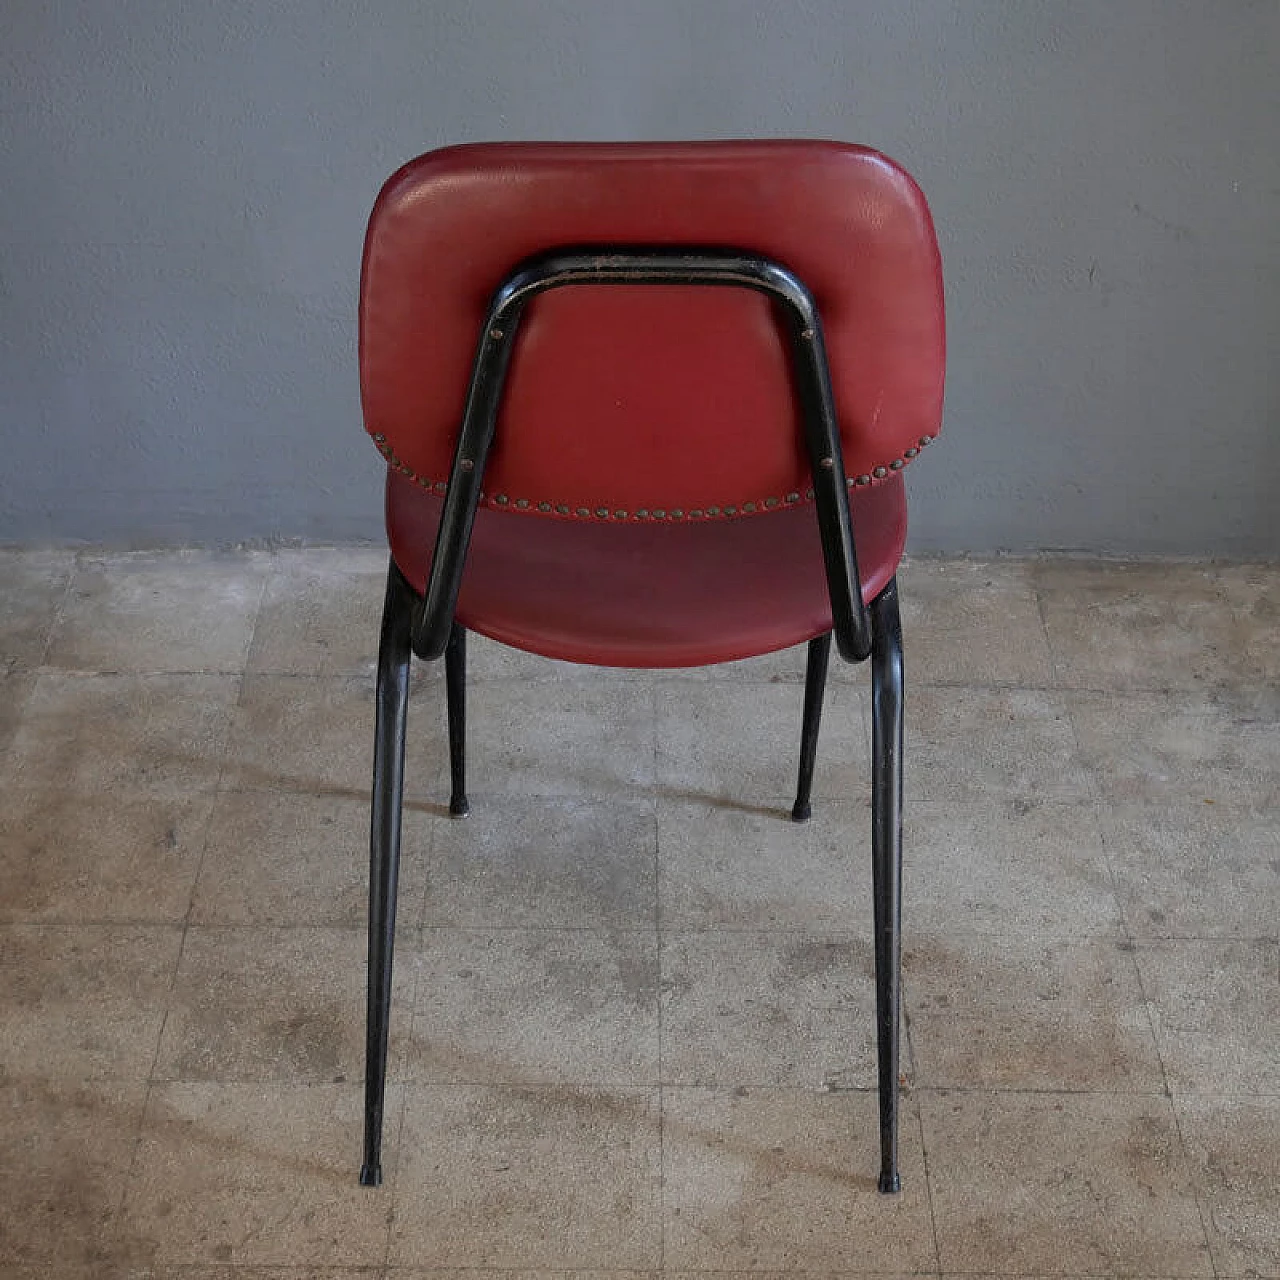 Theatre chairs from the 60s, eco-leather seat 5